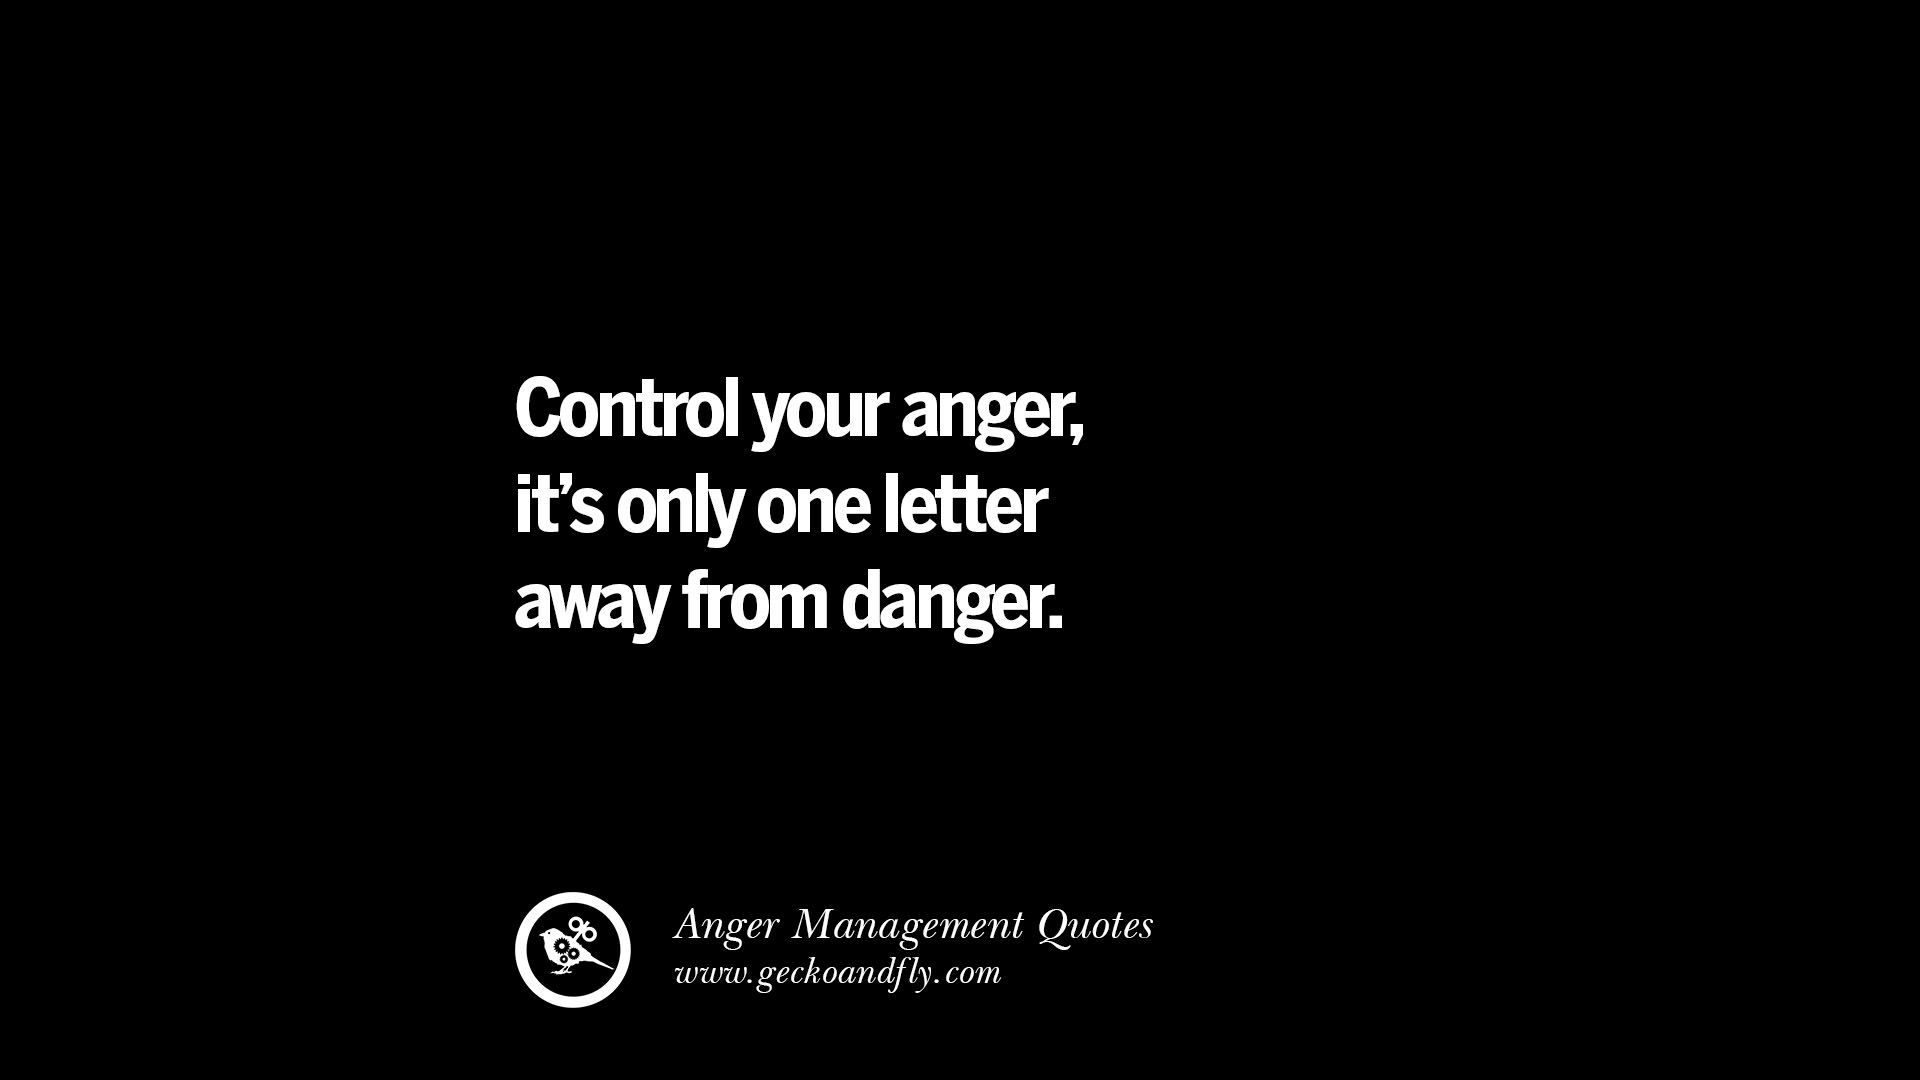 Quotes On Anger Management, Controlling Anger, And Relieving Stress